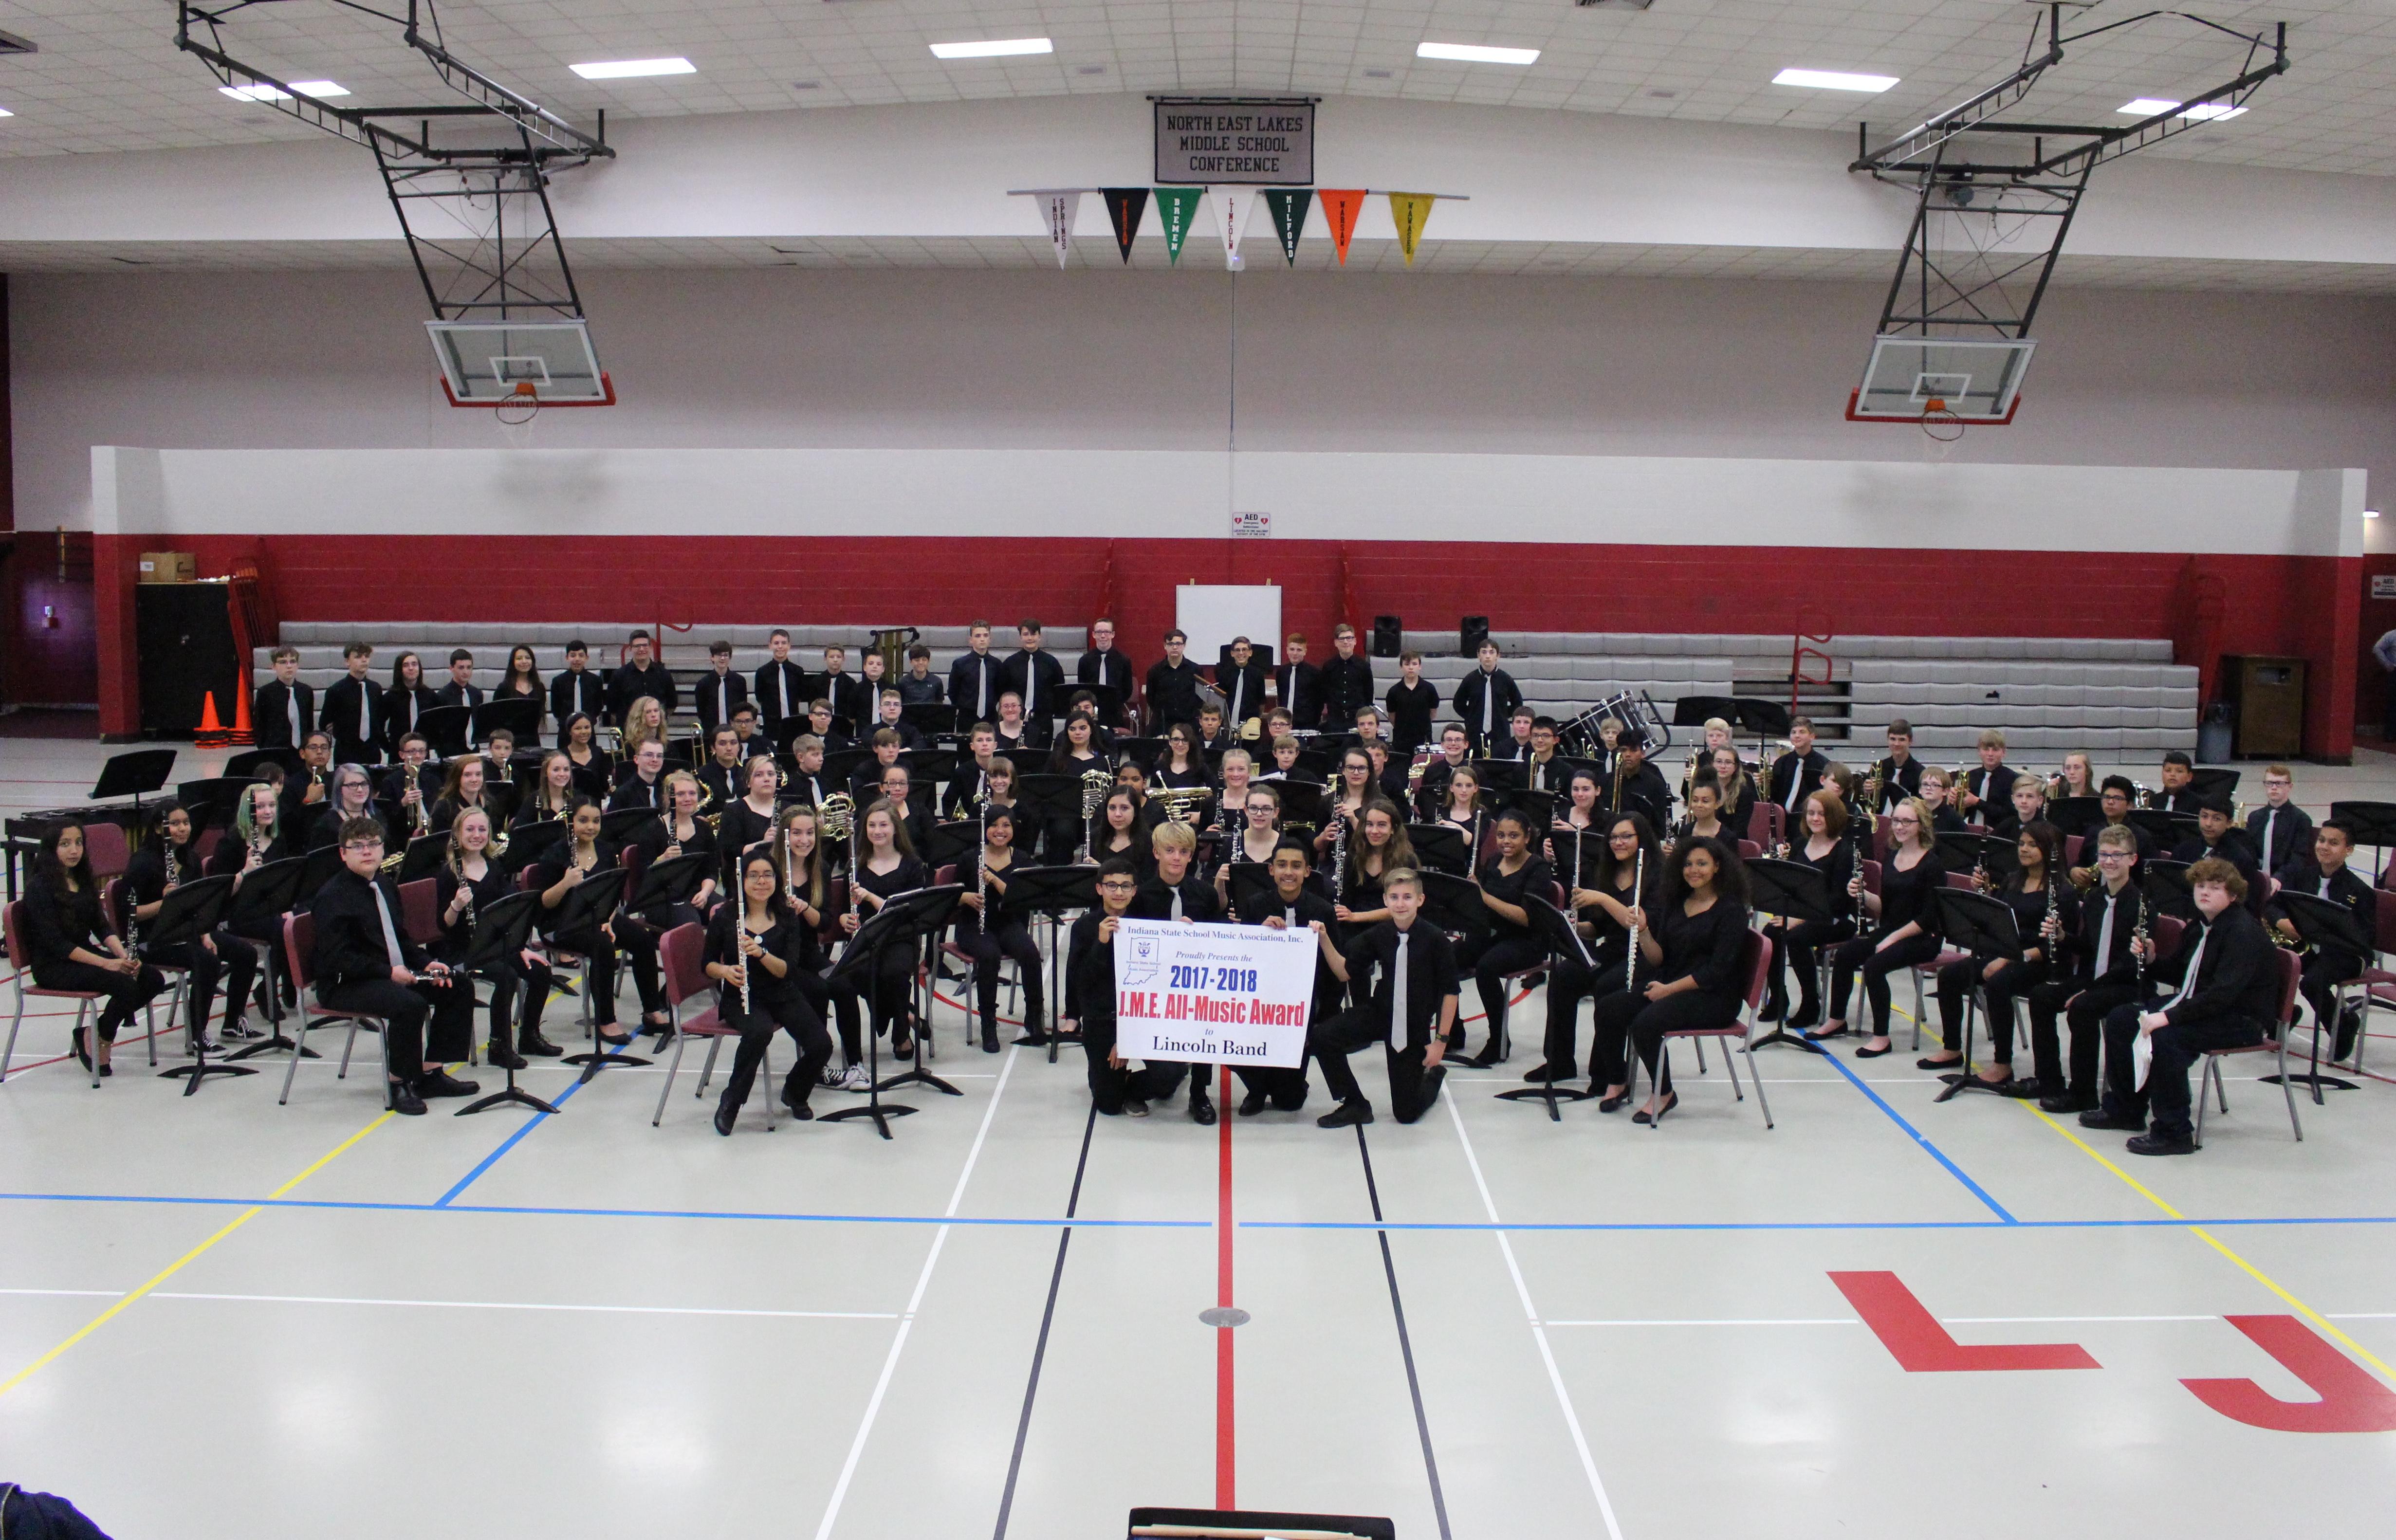 LJH Music students with their ISSMA All-Music Award Banner